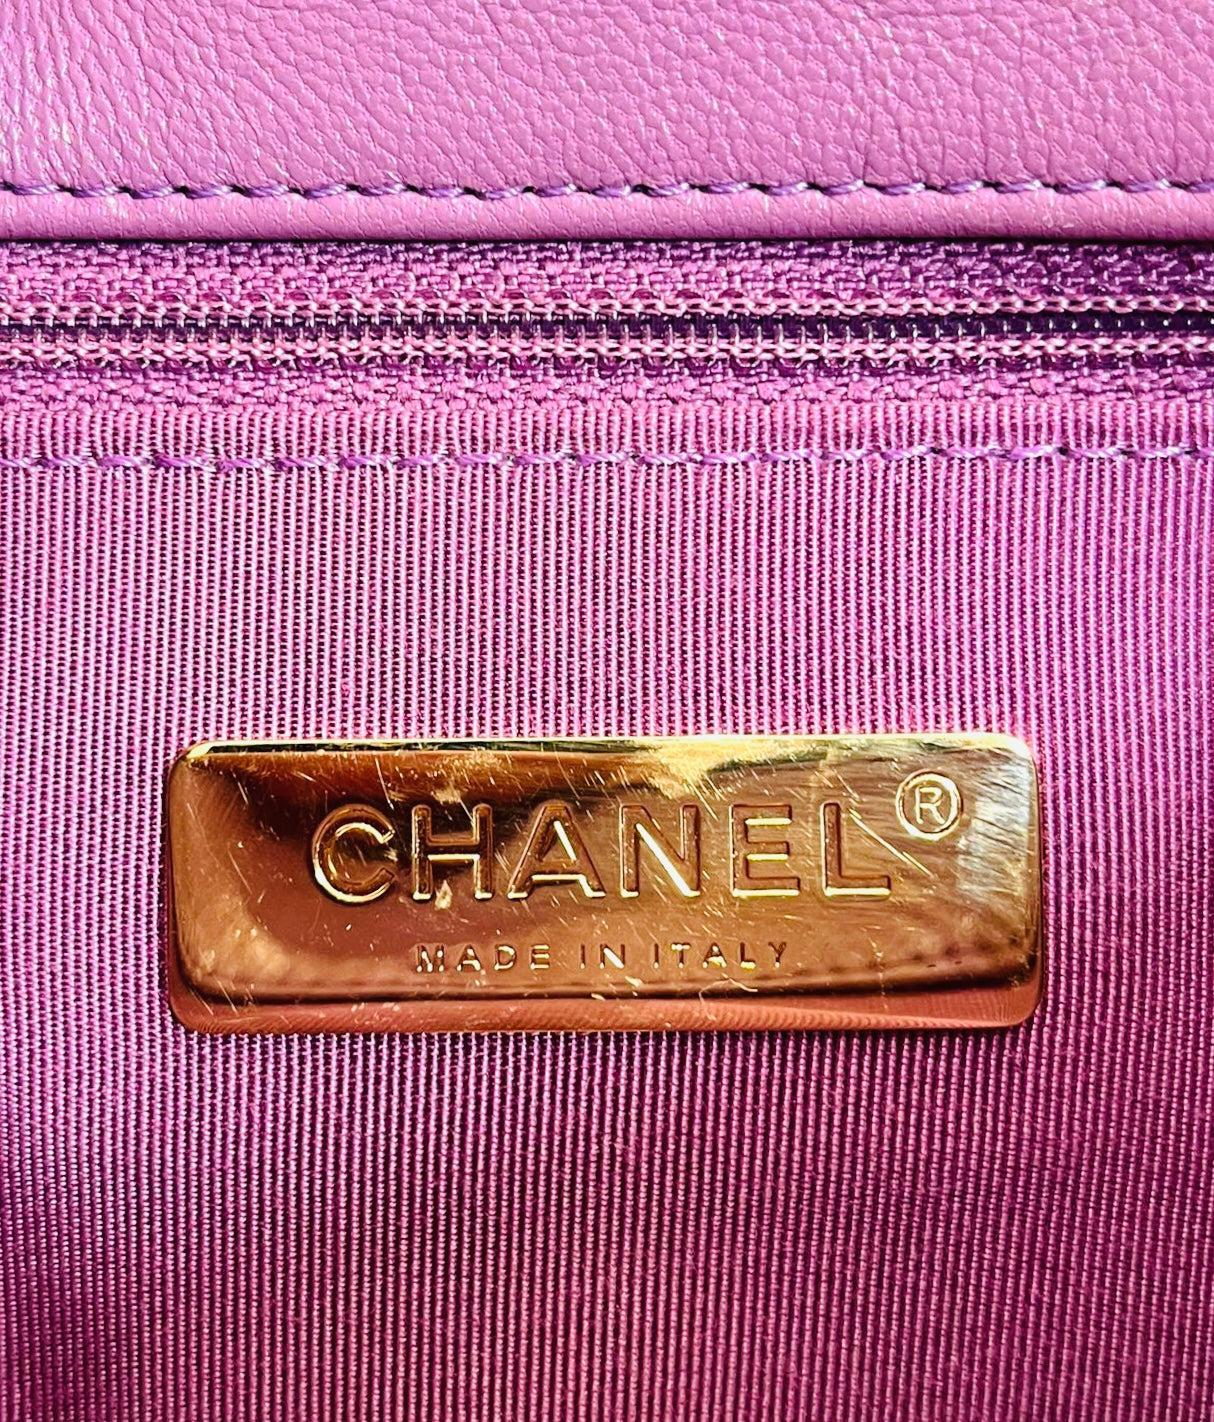 Chanel 19 Leather Flap Bag For Sale 5